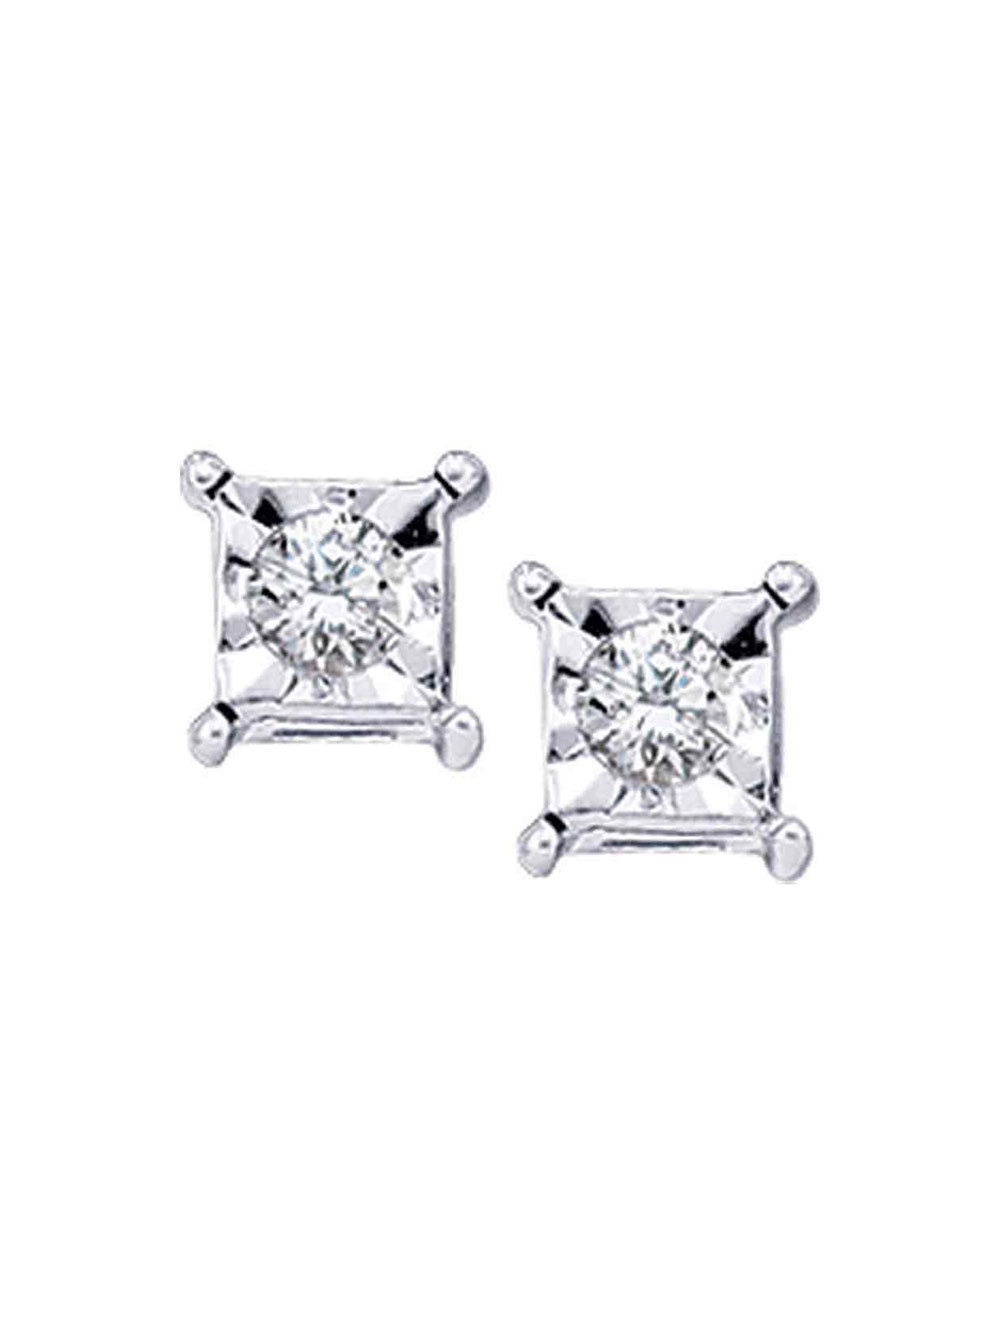 3Gems Jewelers 10kt White Gold Womens Round Diamond Solitaire Earrings 1/20 Cttw